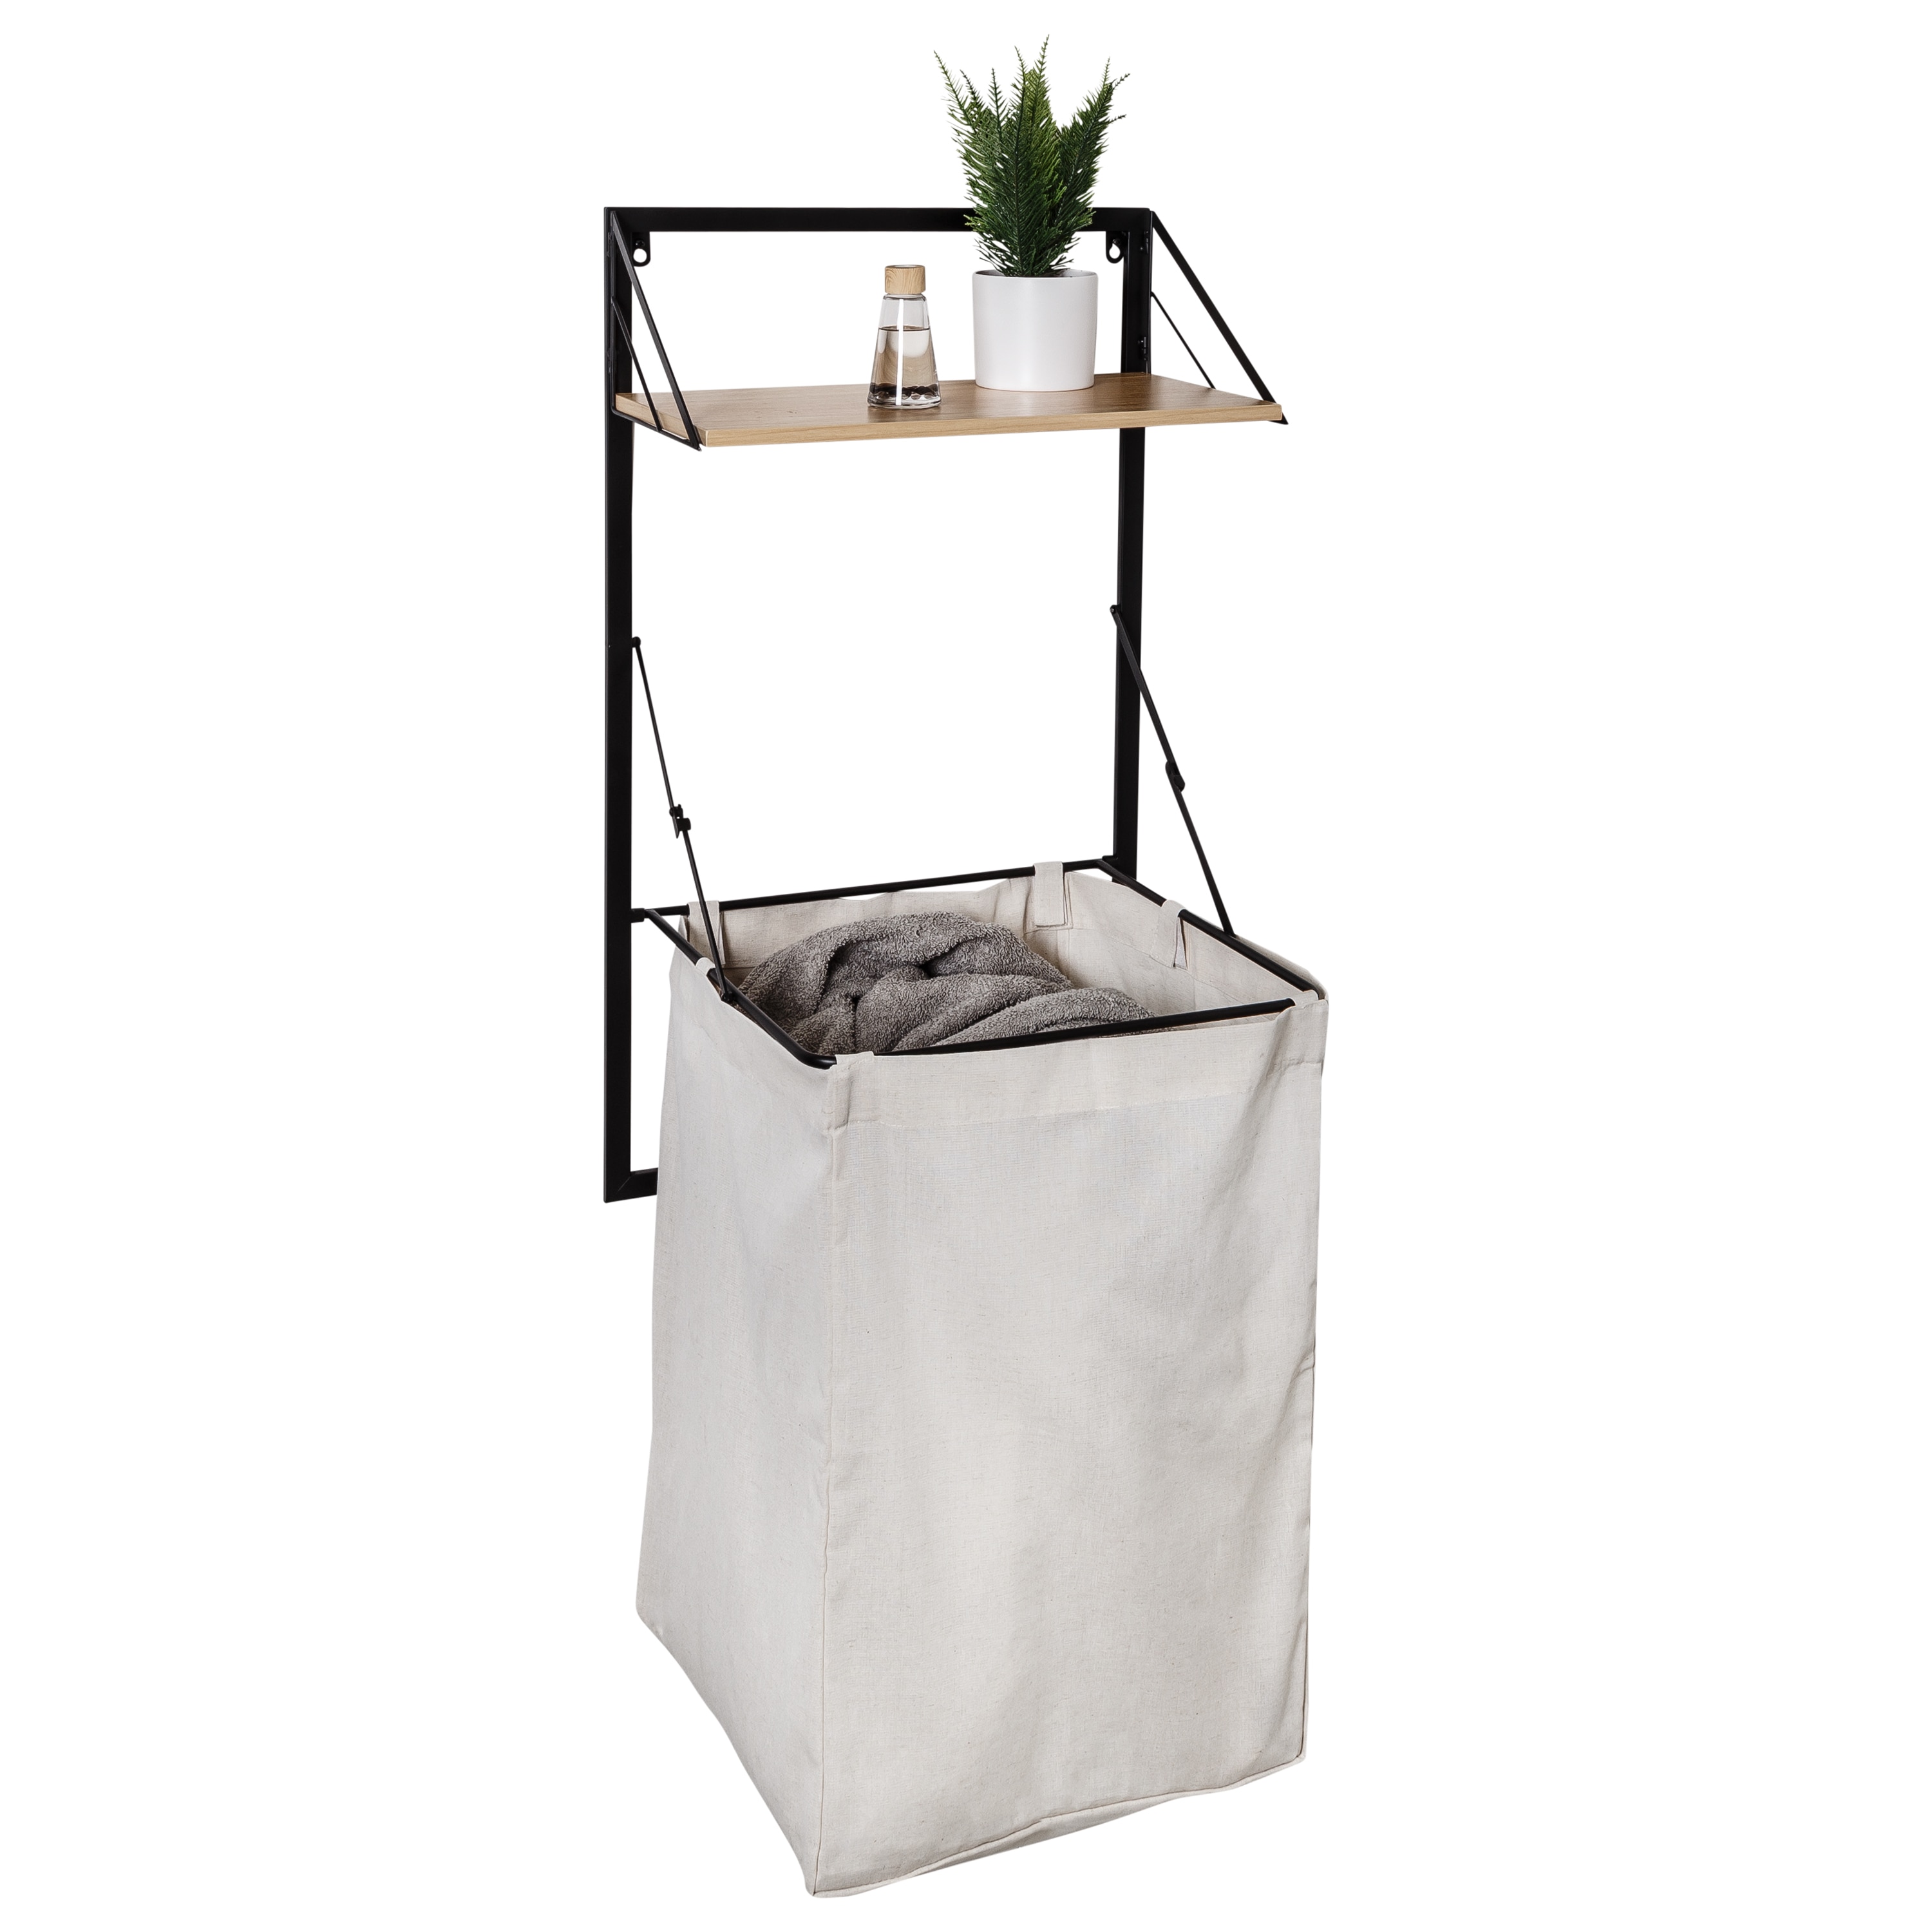 Collapsible Wall-Mounted Clothes Hamper with Canvas Laundry Bag and Wood Shelf